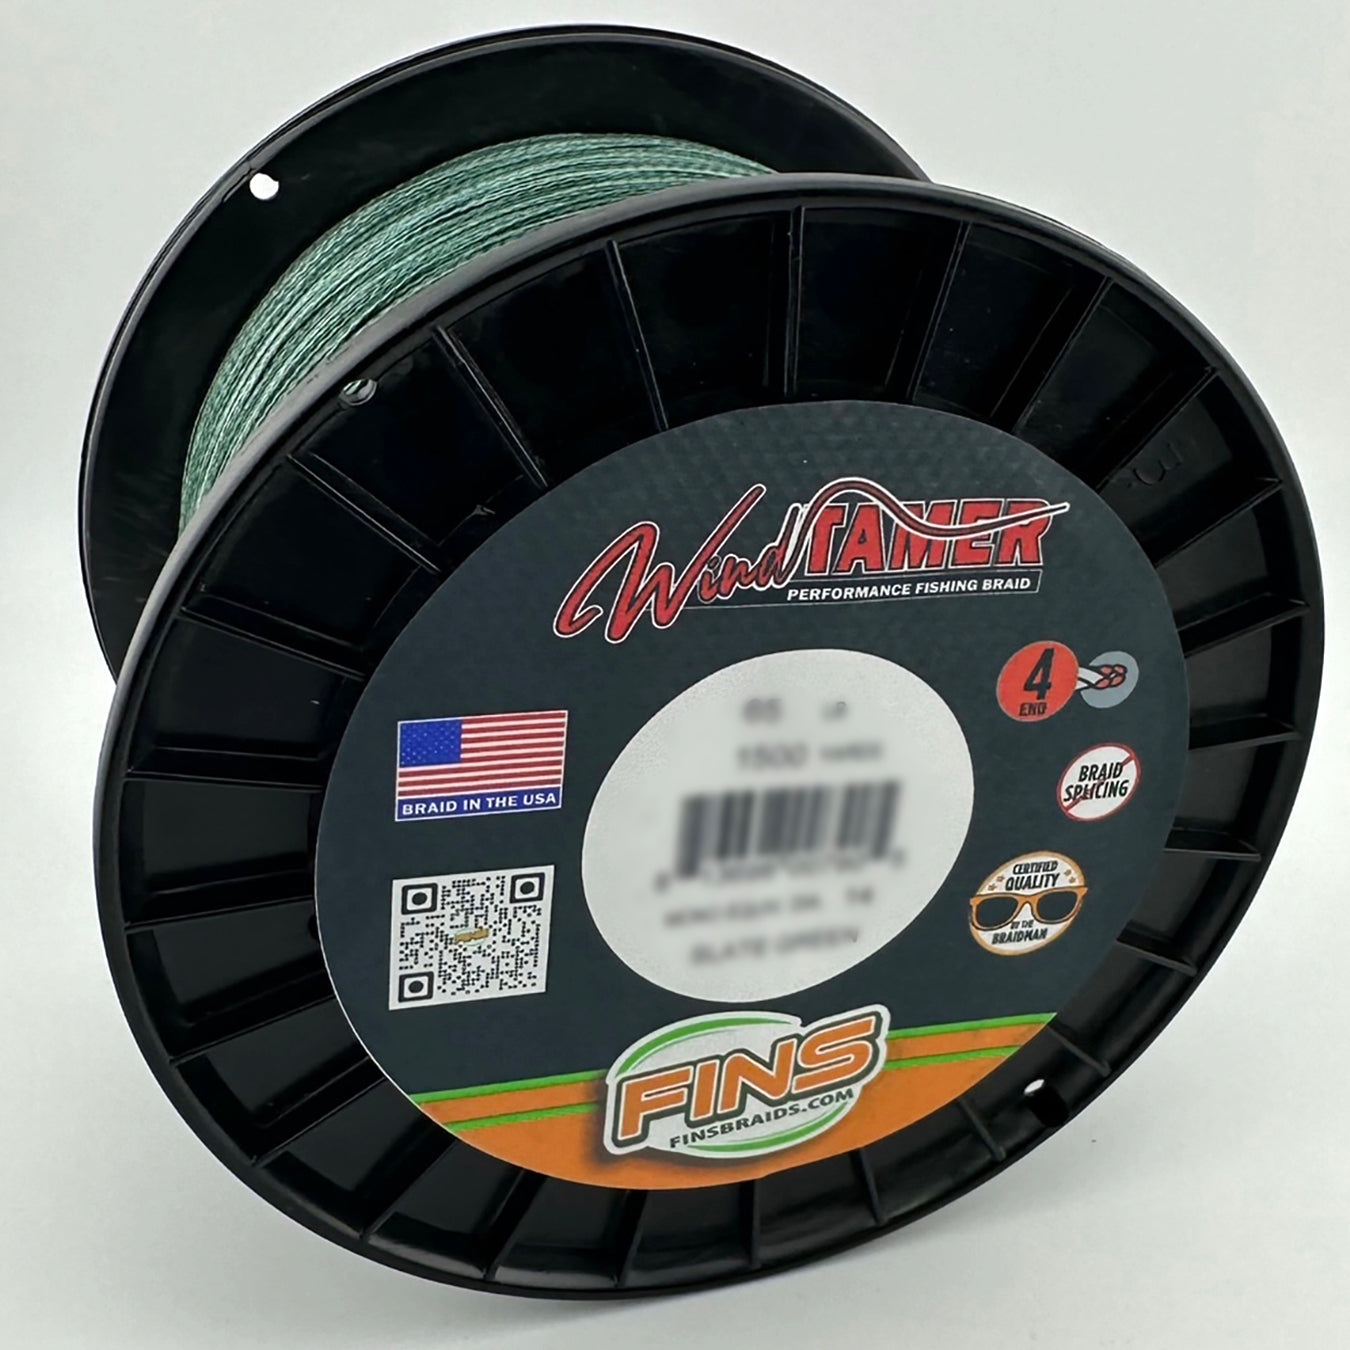 Lunker Braided Line - Thinner, Stronger, 300/547 Yards, 6-80LBs,  Black/Green